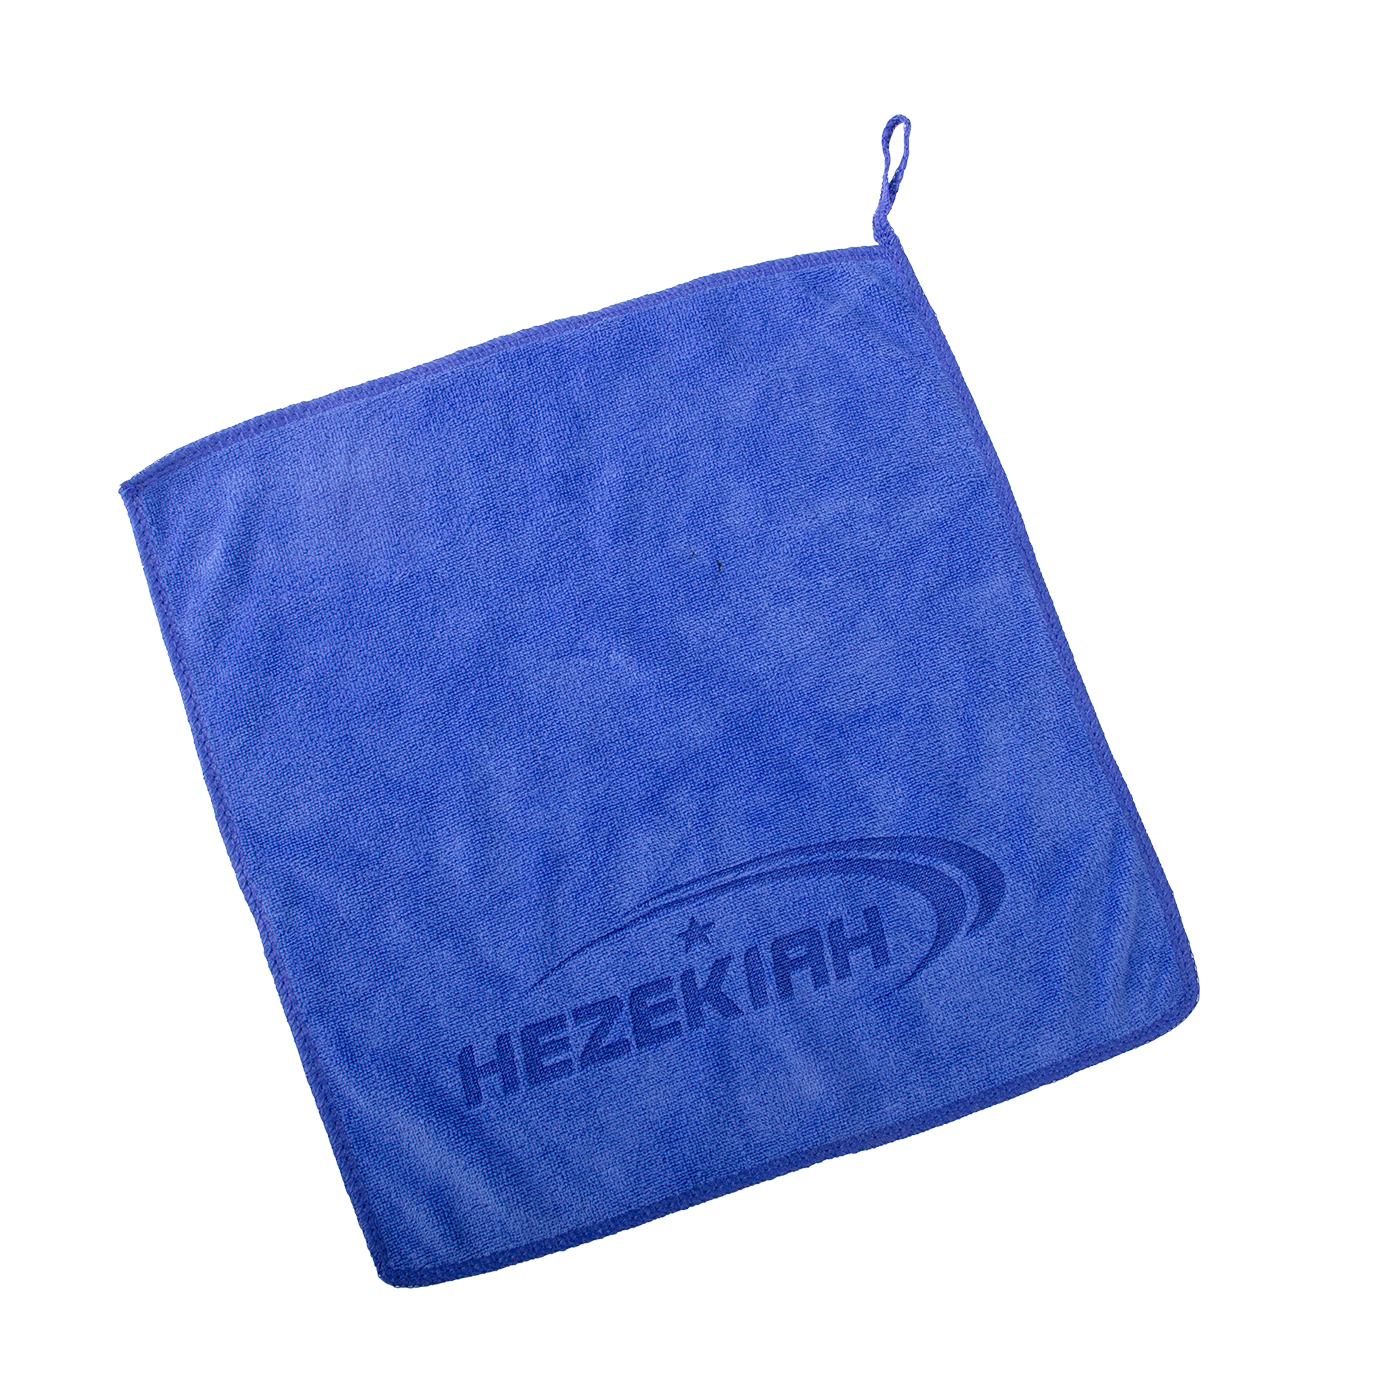 Double Sided Microfiber Cleaning Towel2